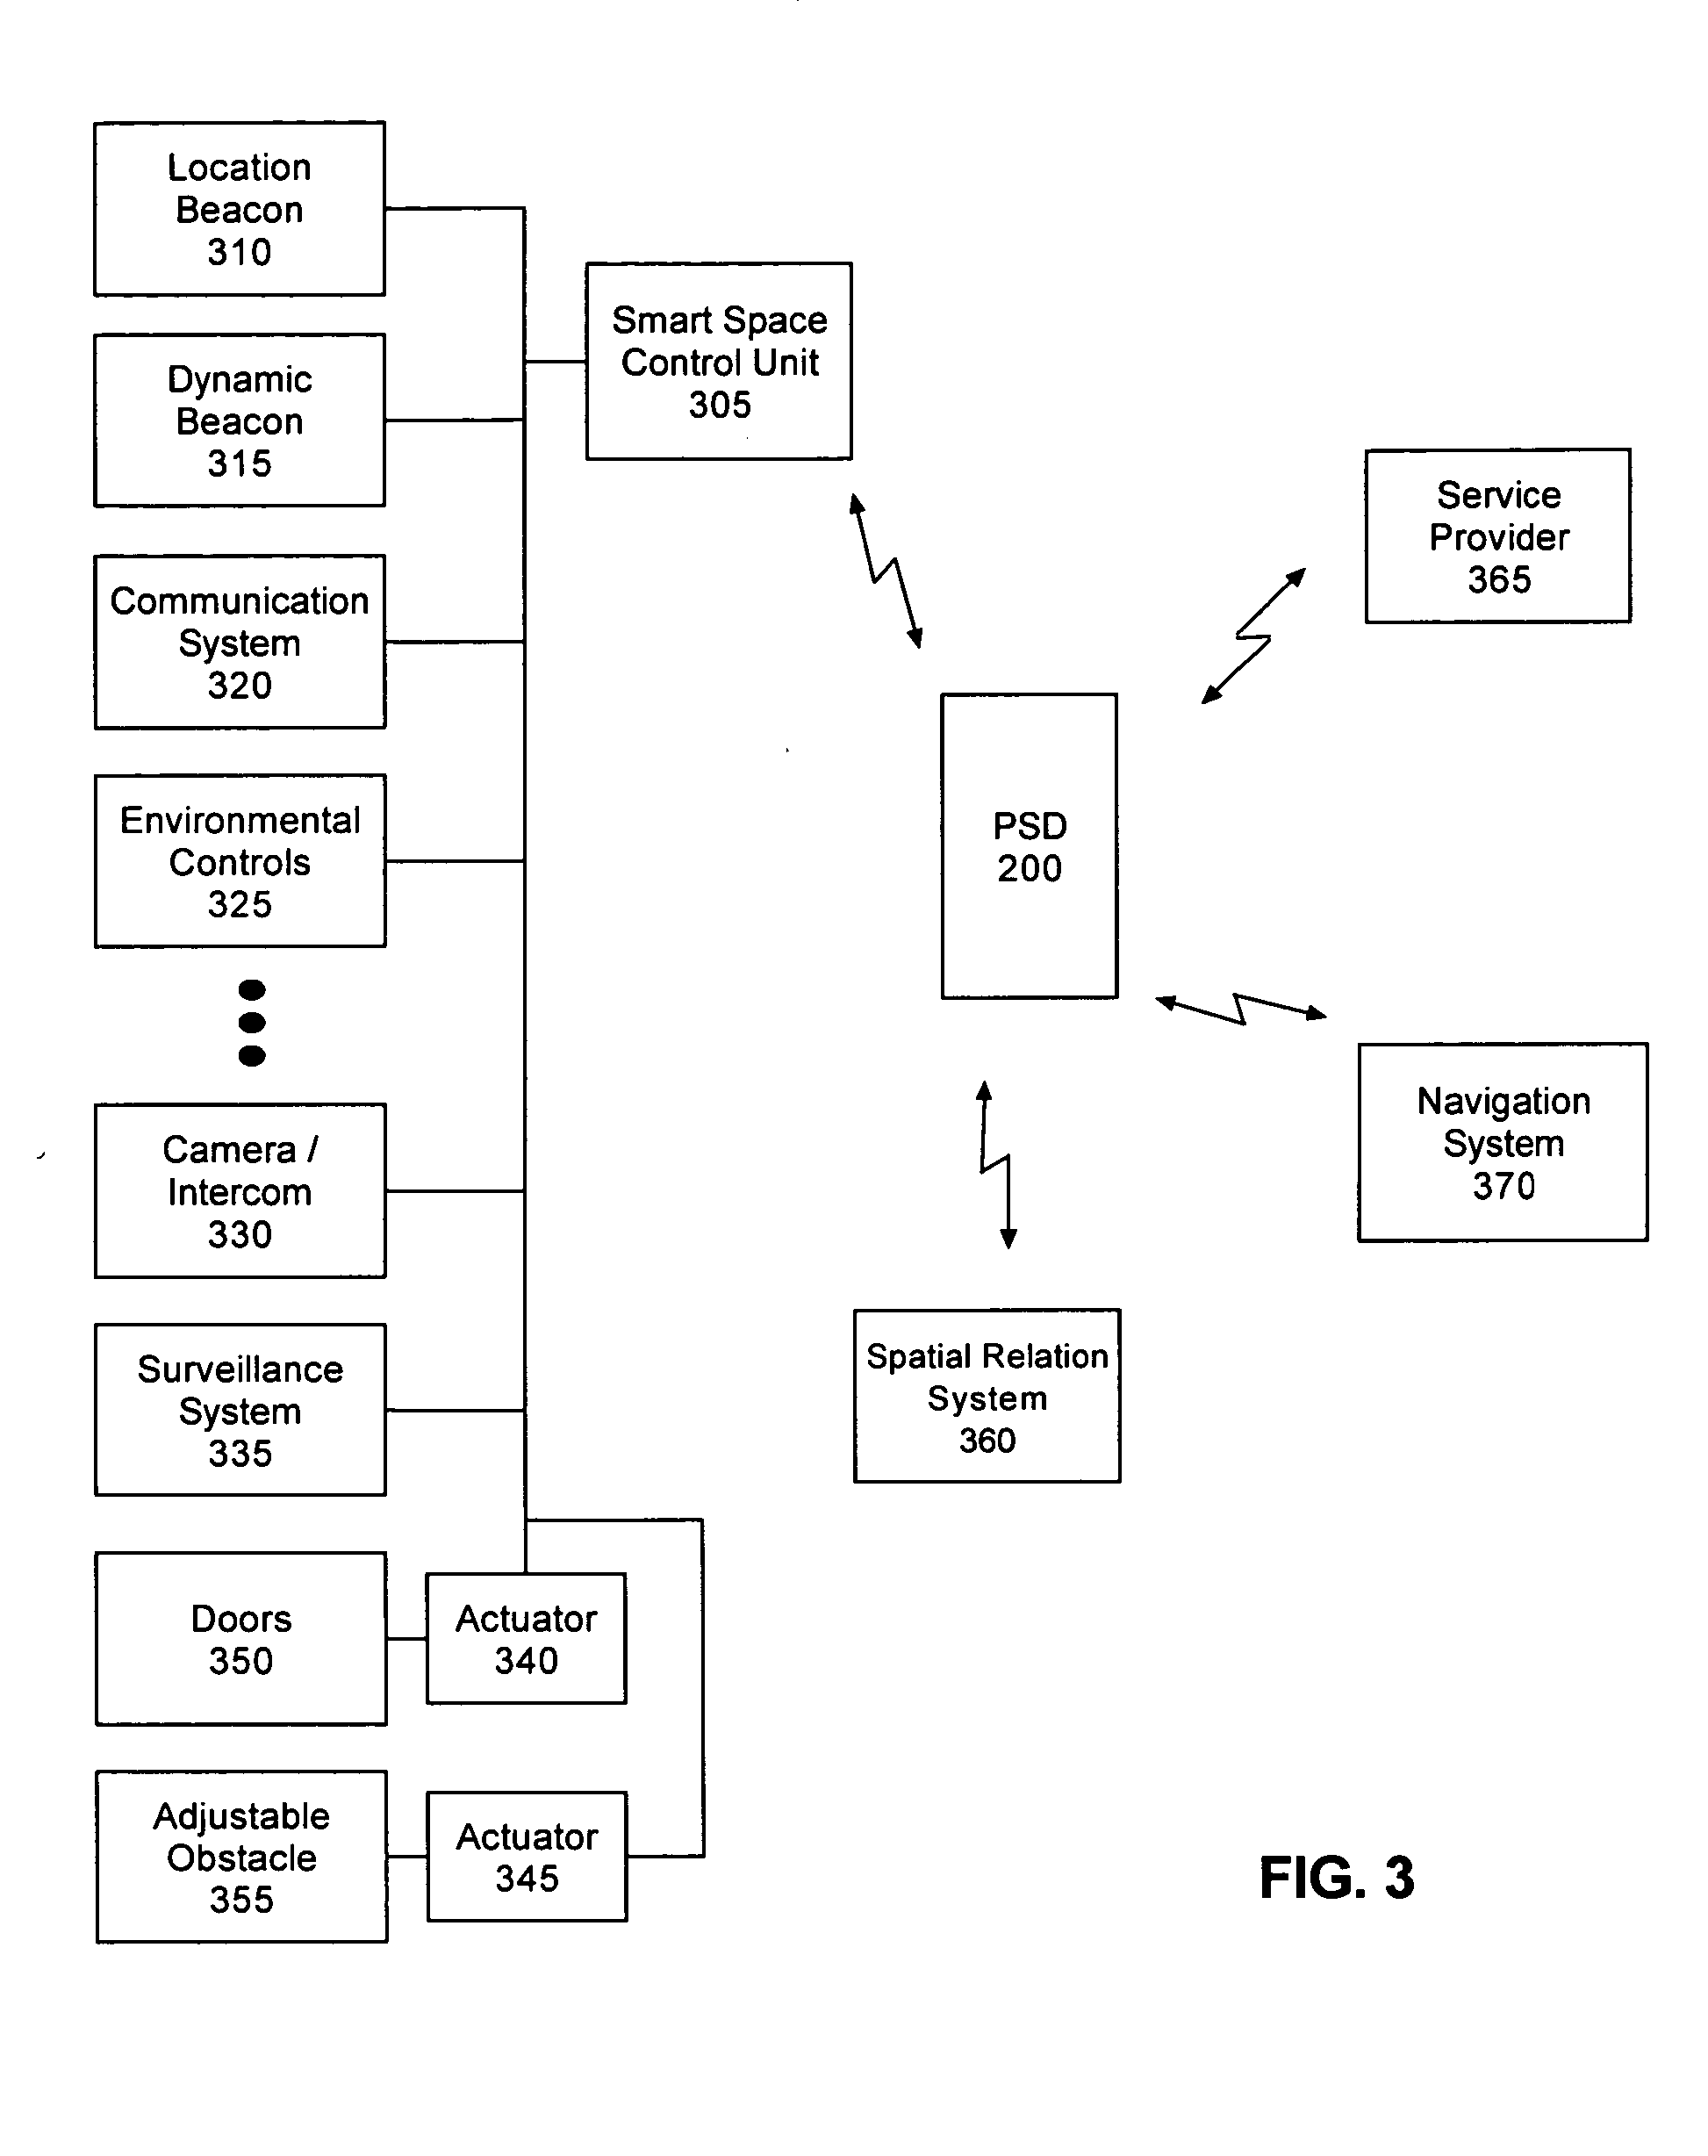 Pedestrian navigation and spatial relation device